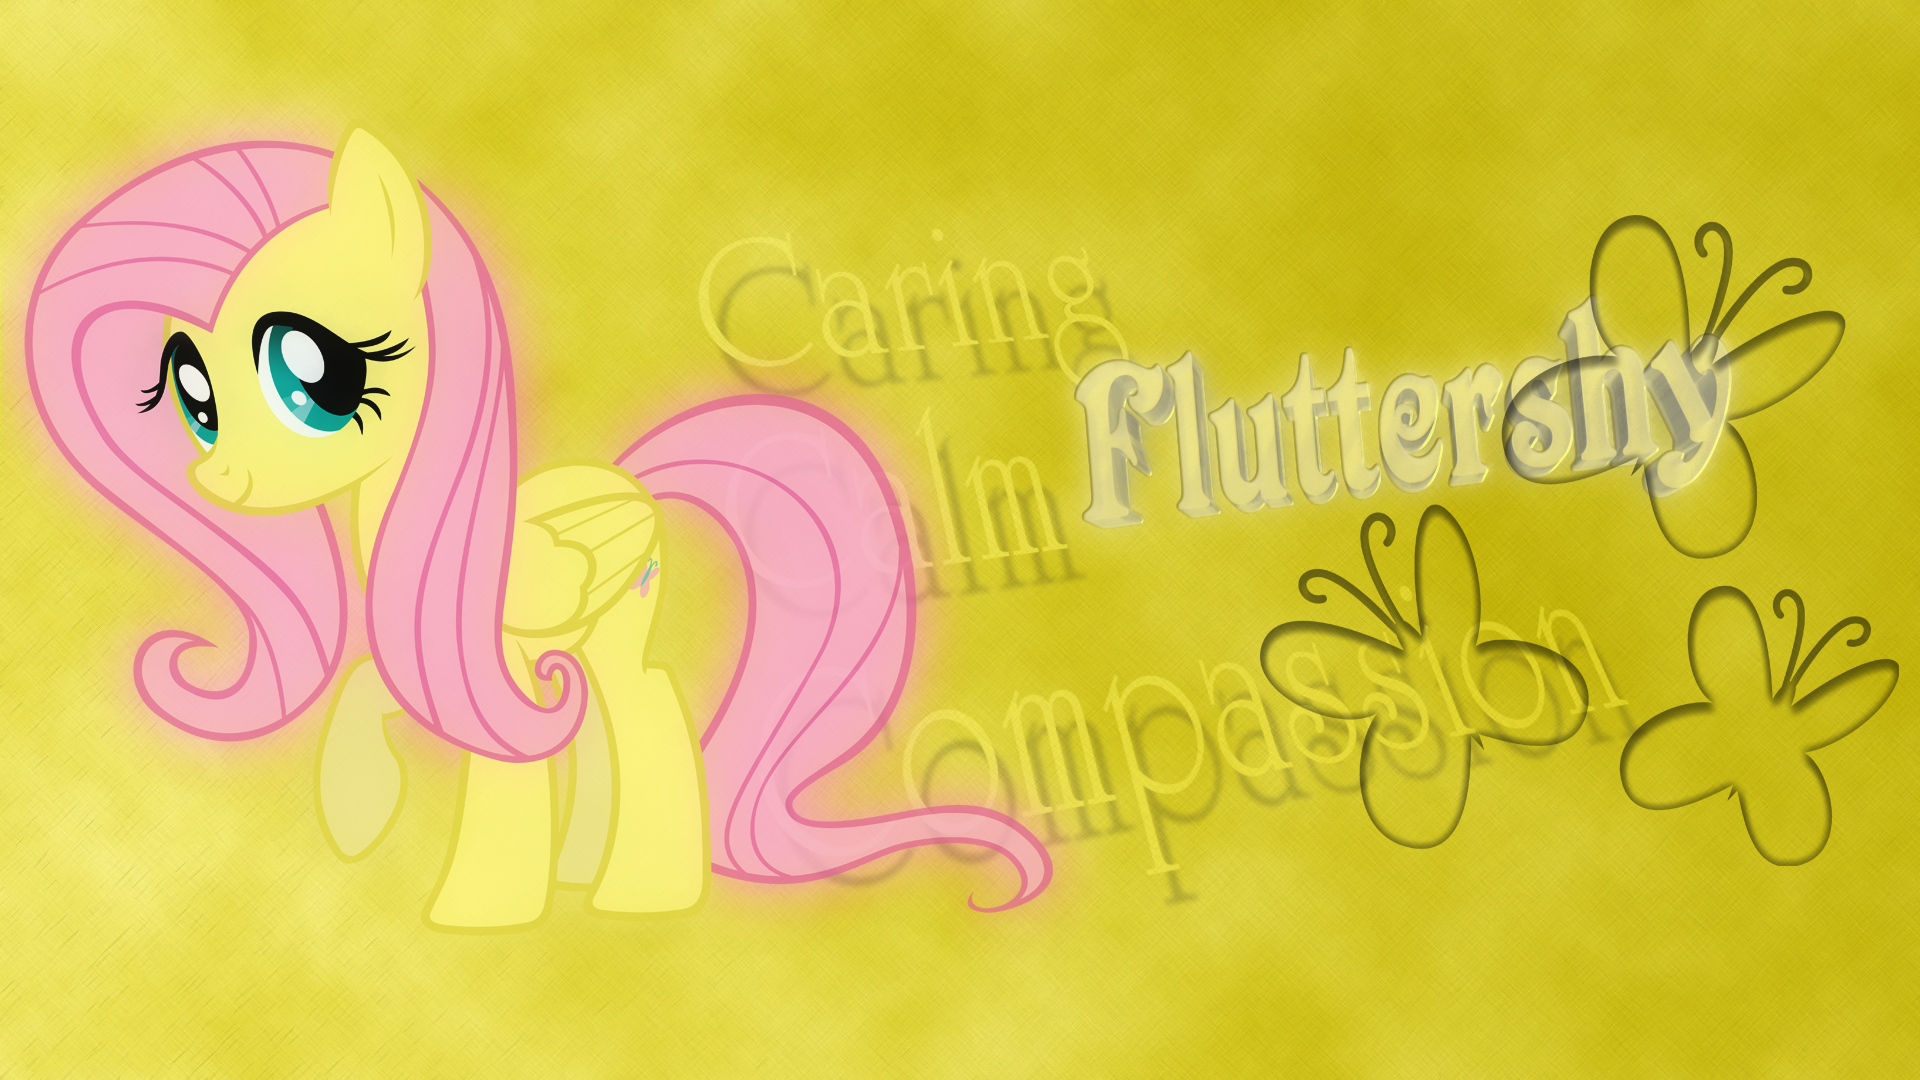 Fluttershy - Caring Calm Compassion by BlackGryph0n, EmbersAtDawn and Retrantulus